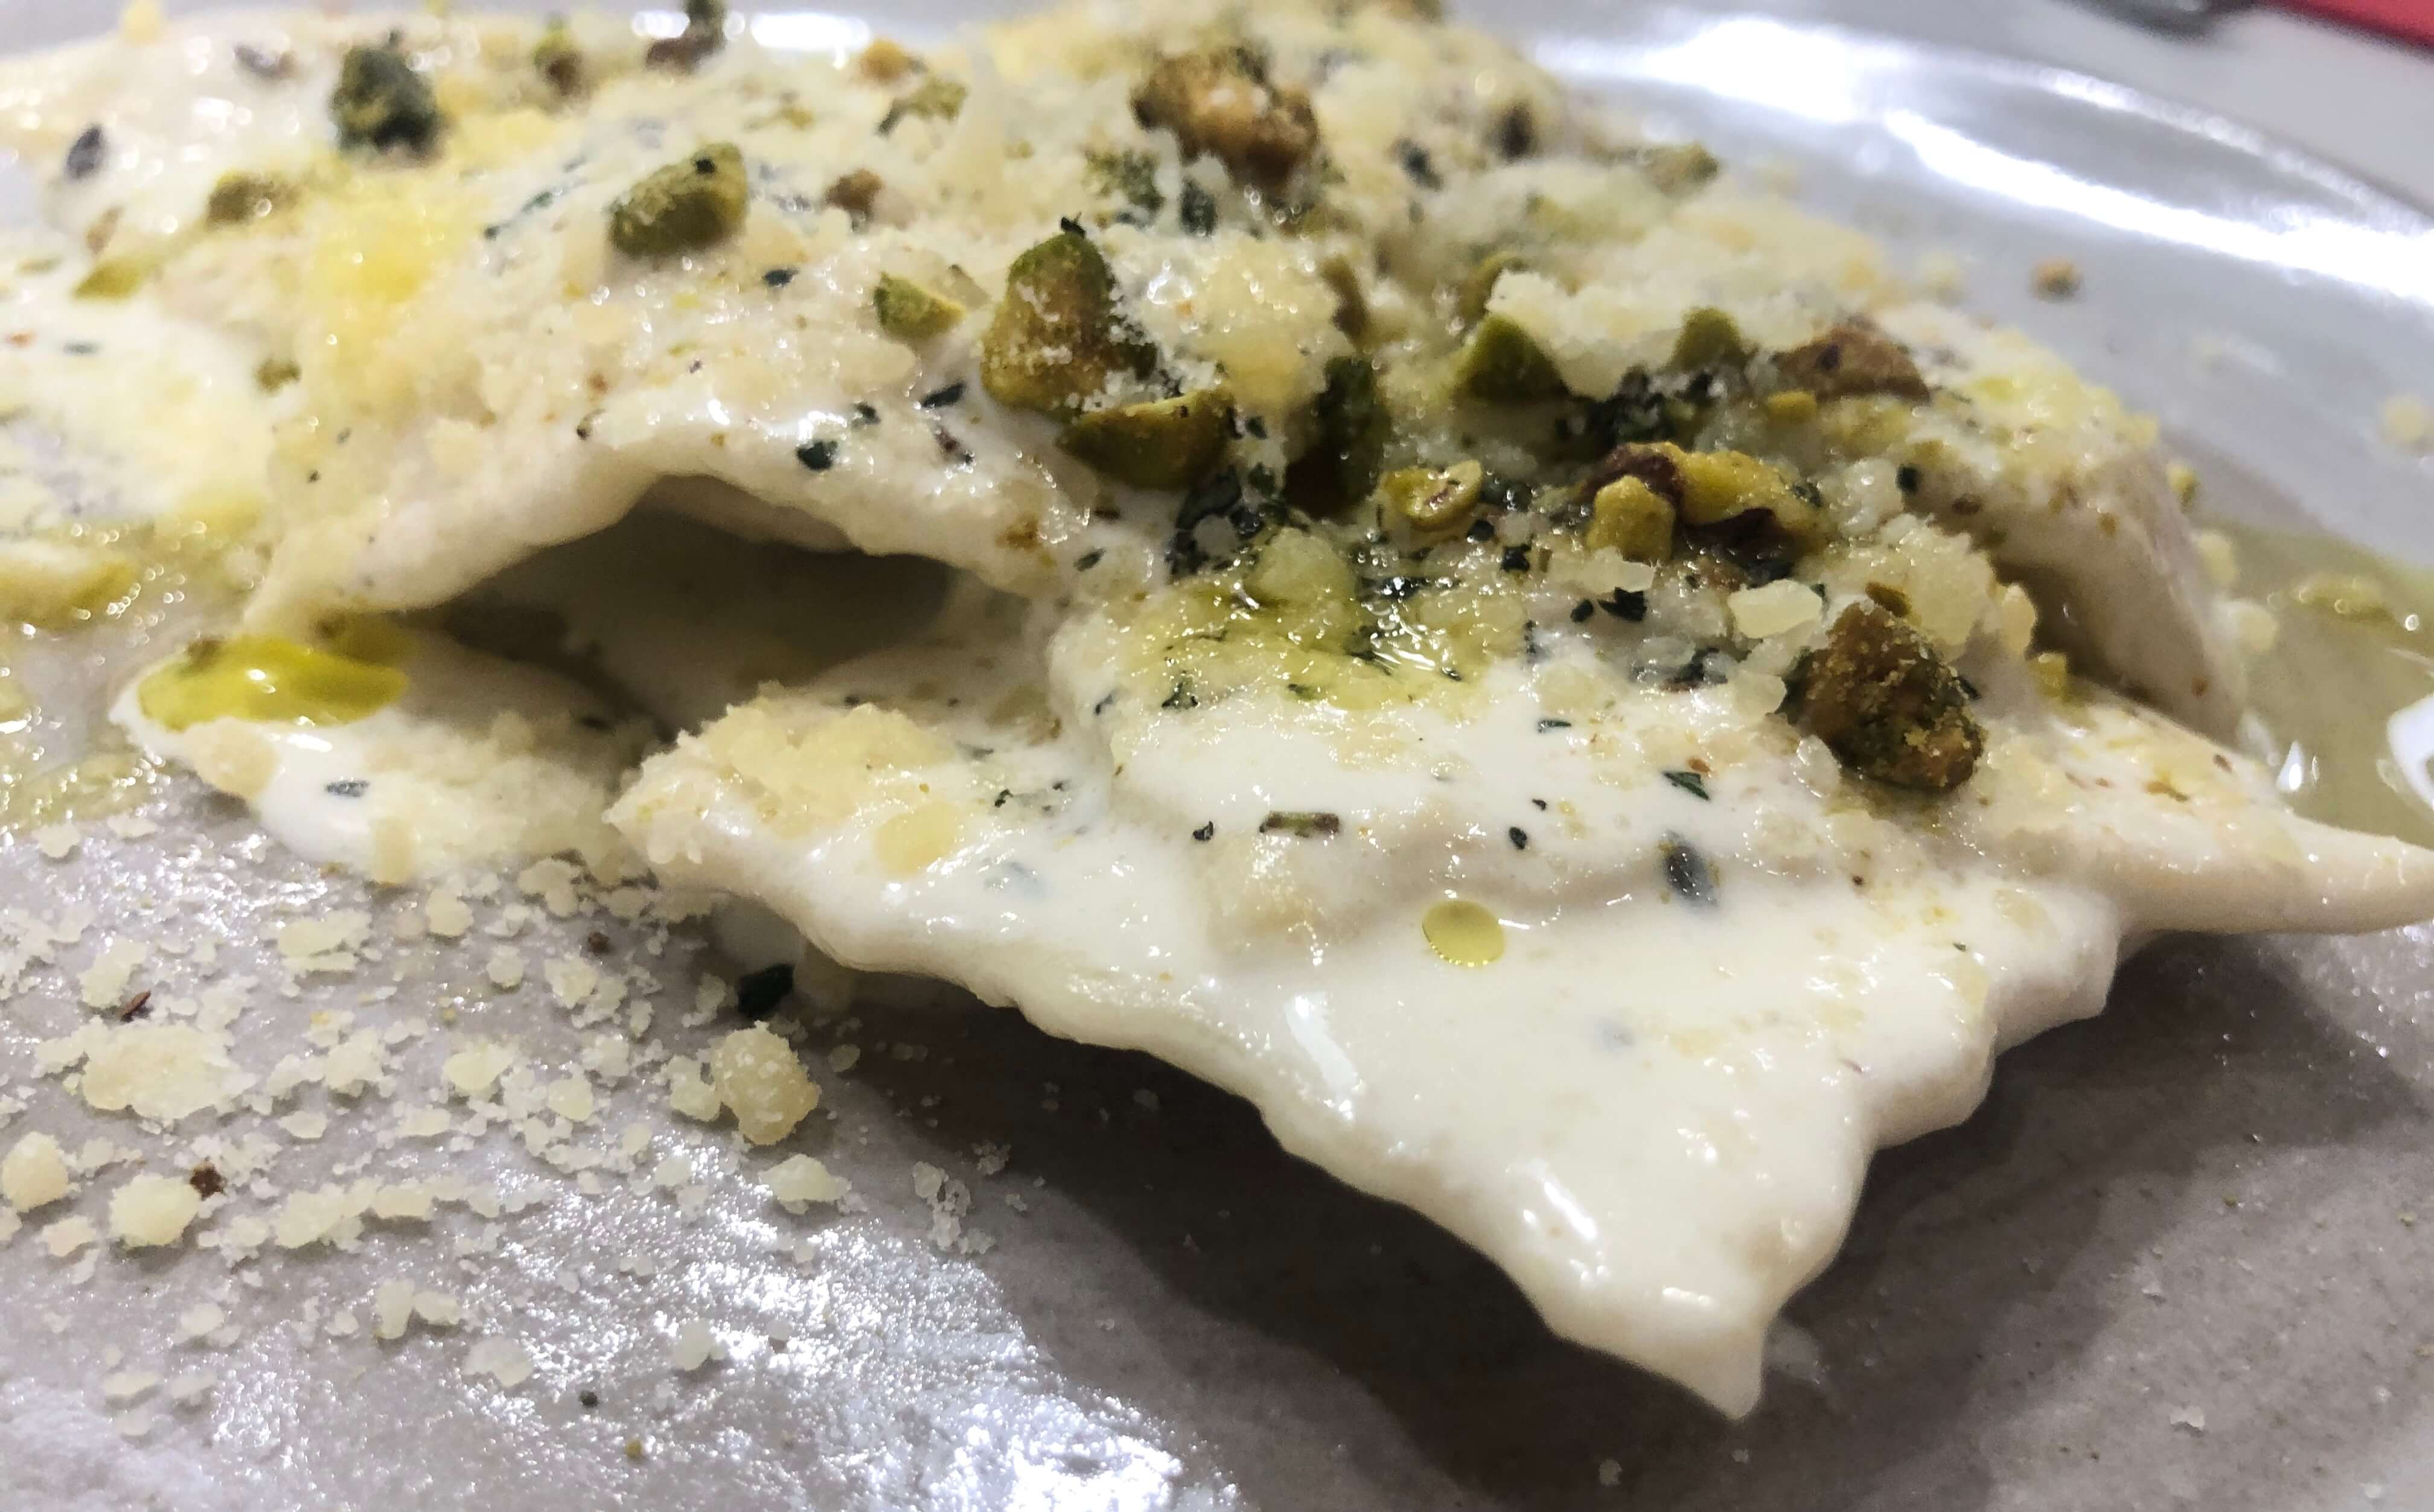 Signature Figue Ravioli. Goat cheese, dried figs, herbs, and lemon served with a creamy thyme and pistachio sauce.